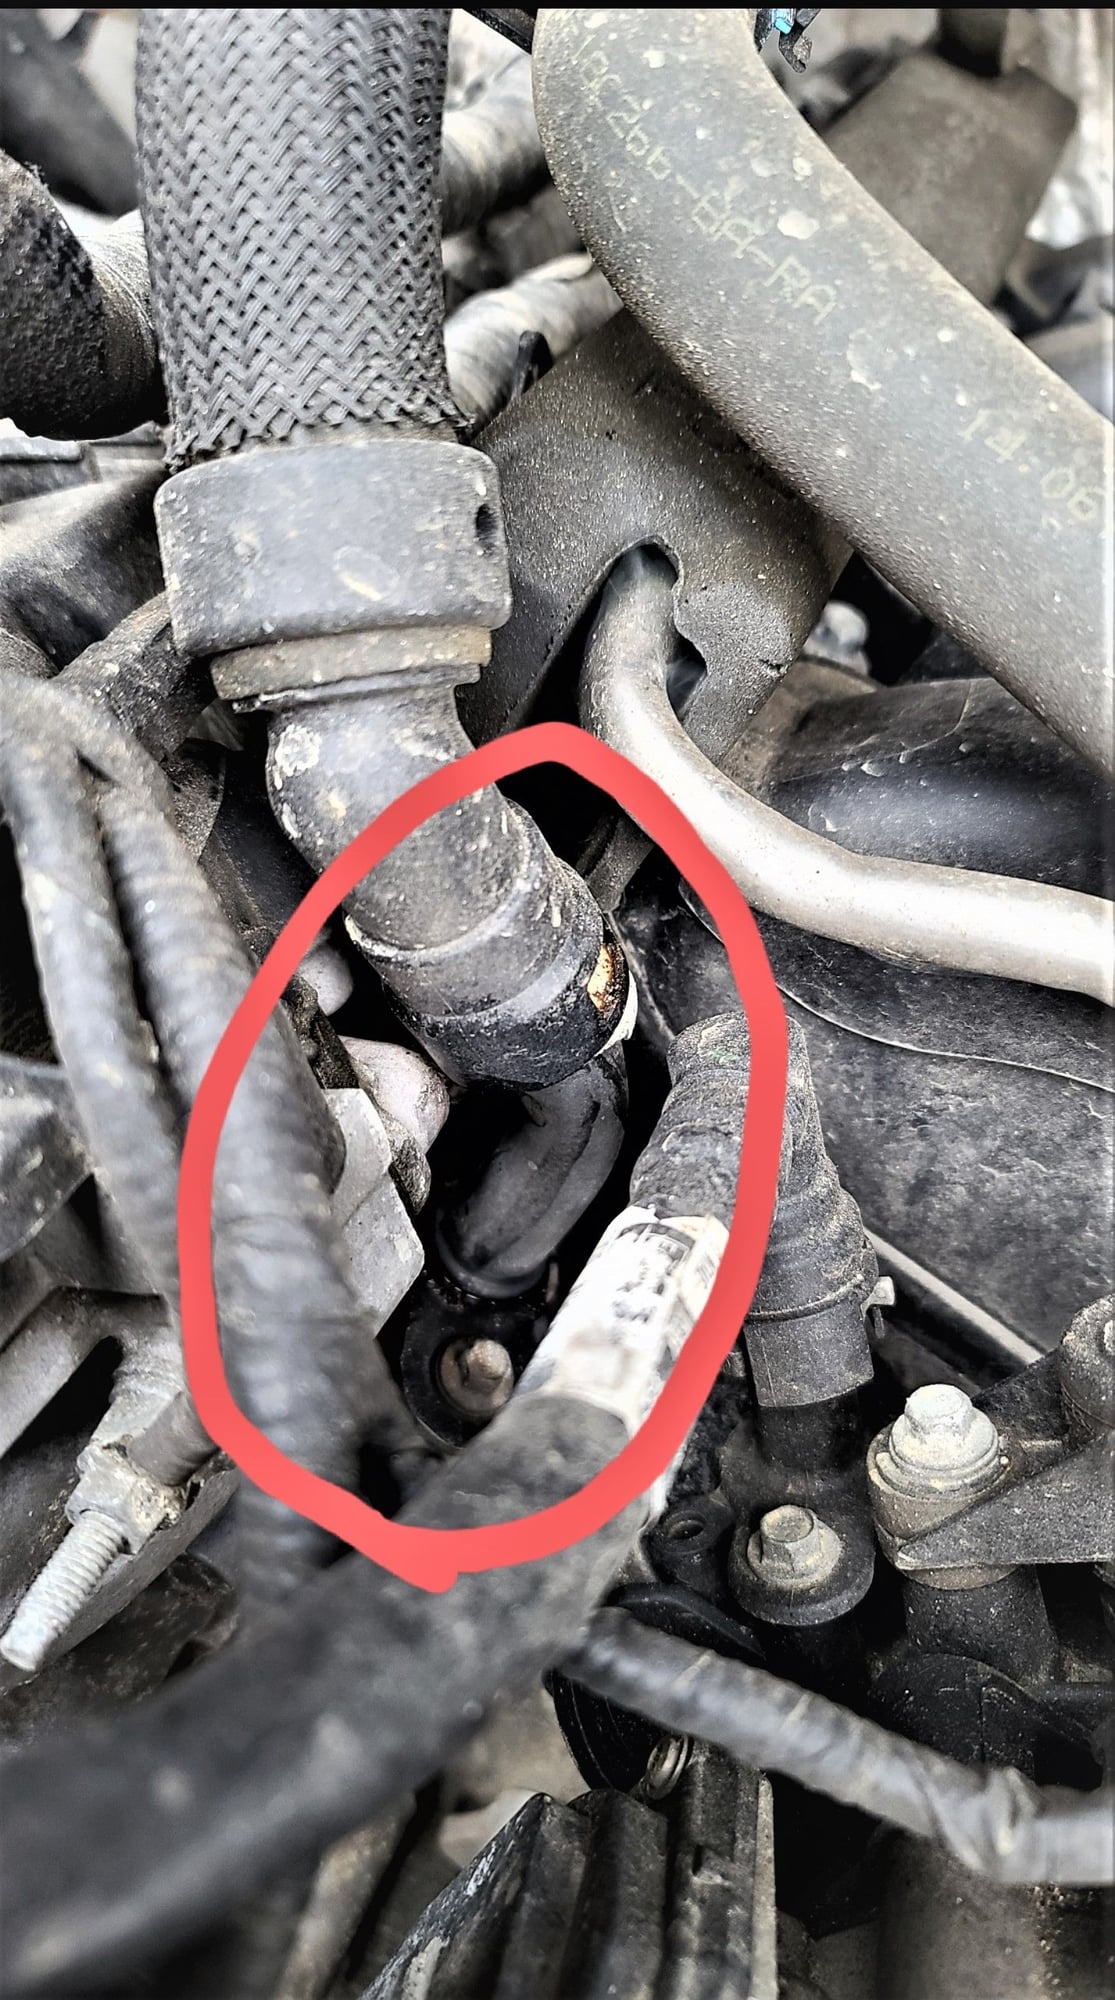 Heater core hose removal tool